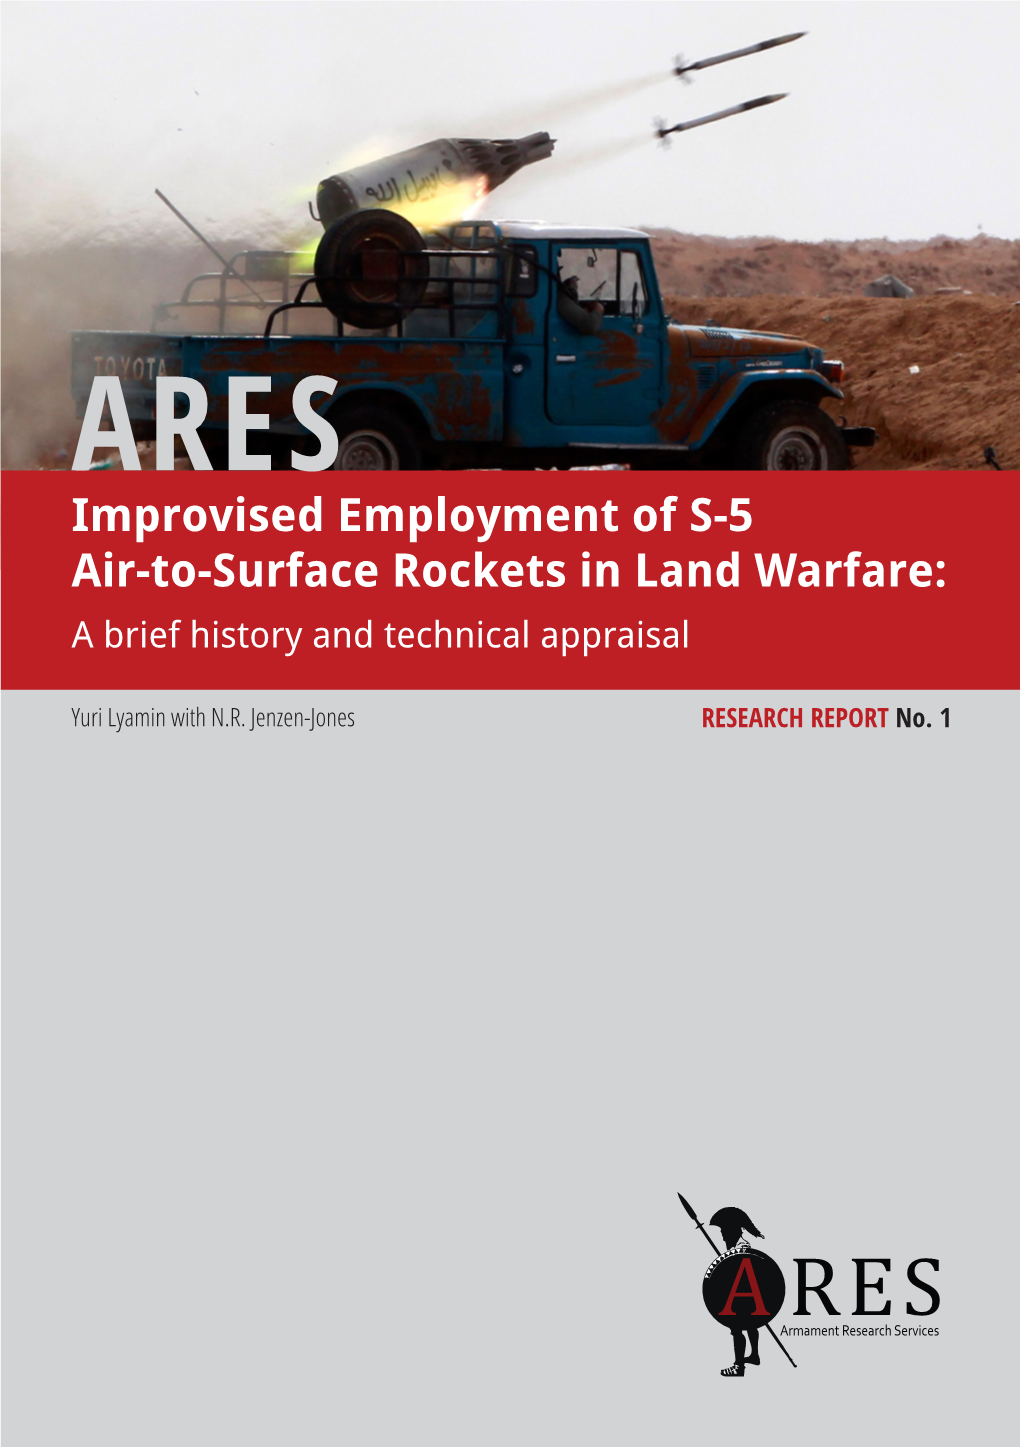 Improvised Employment of S-5 Air-To-Surface Rockets in Land Warfare: a Brief History and Technical Appraisal